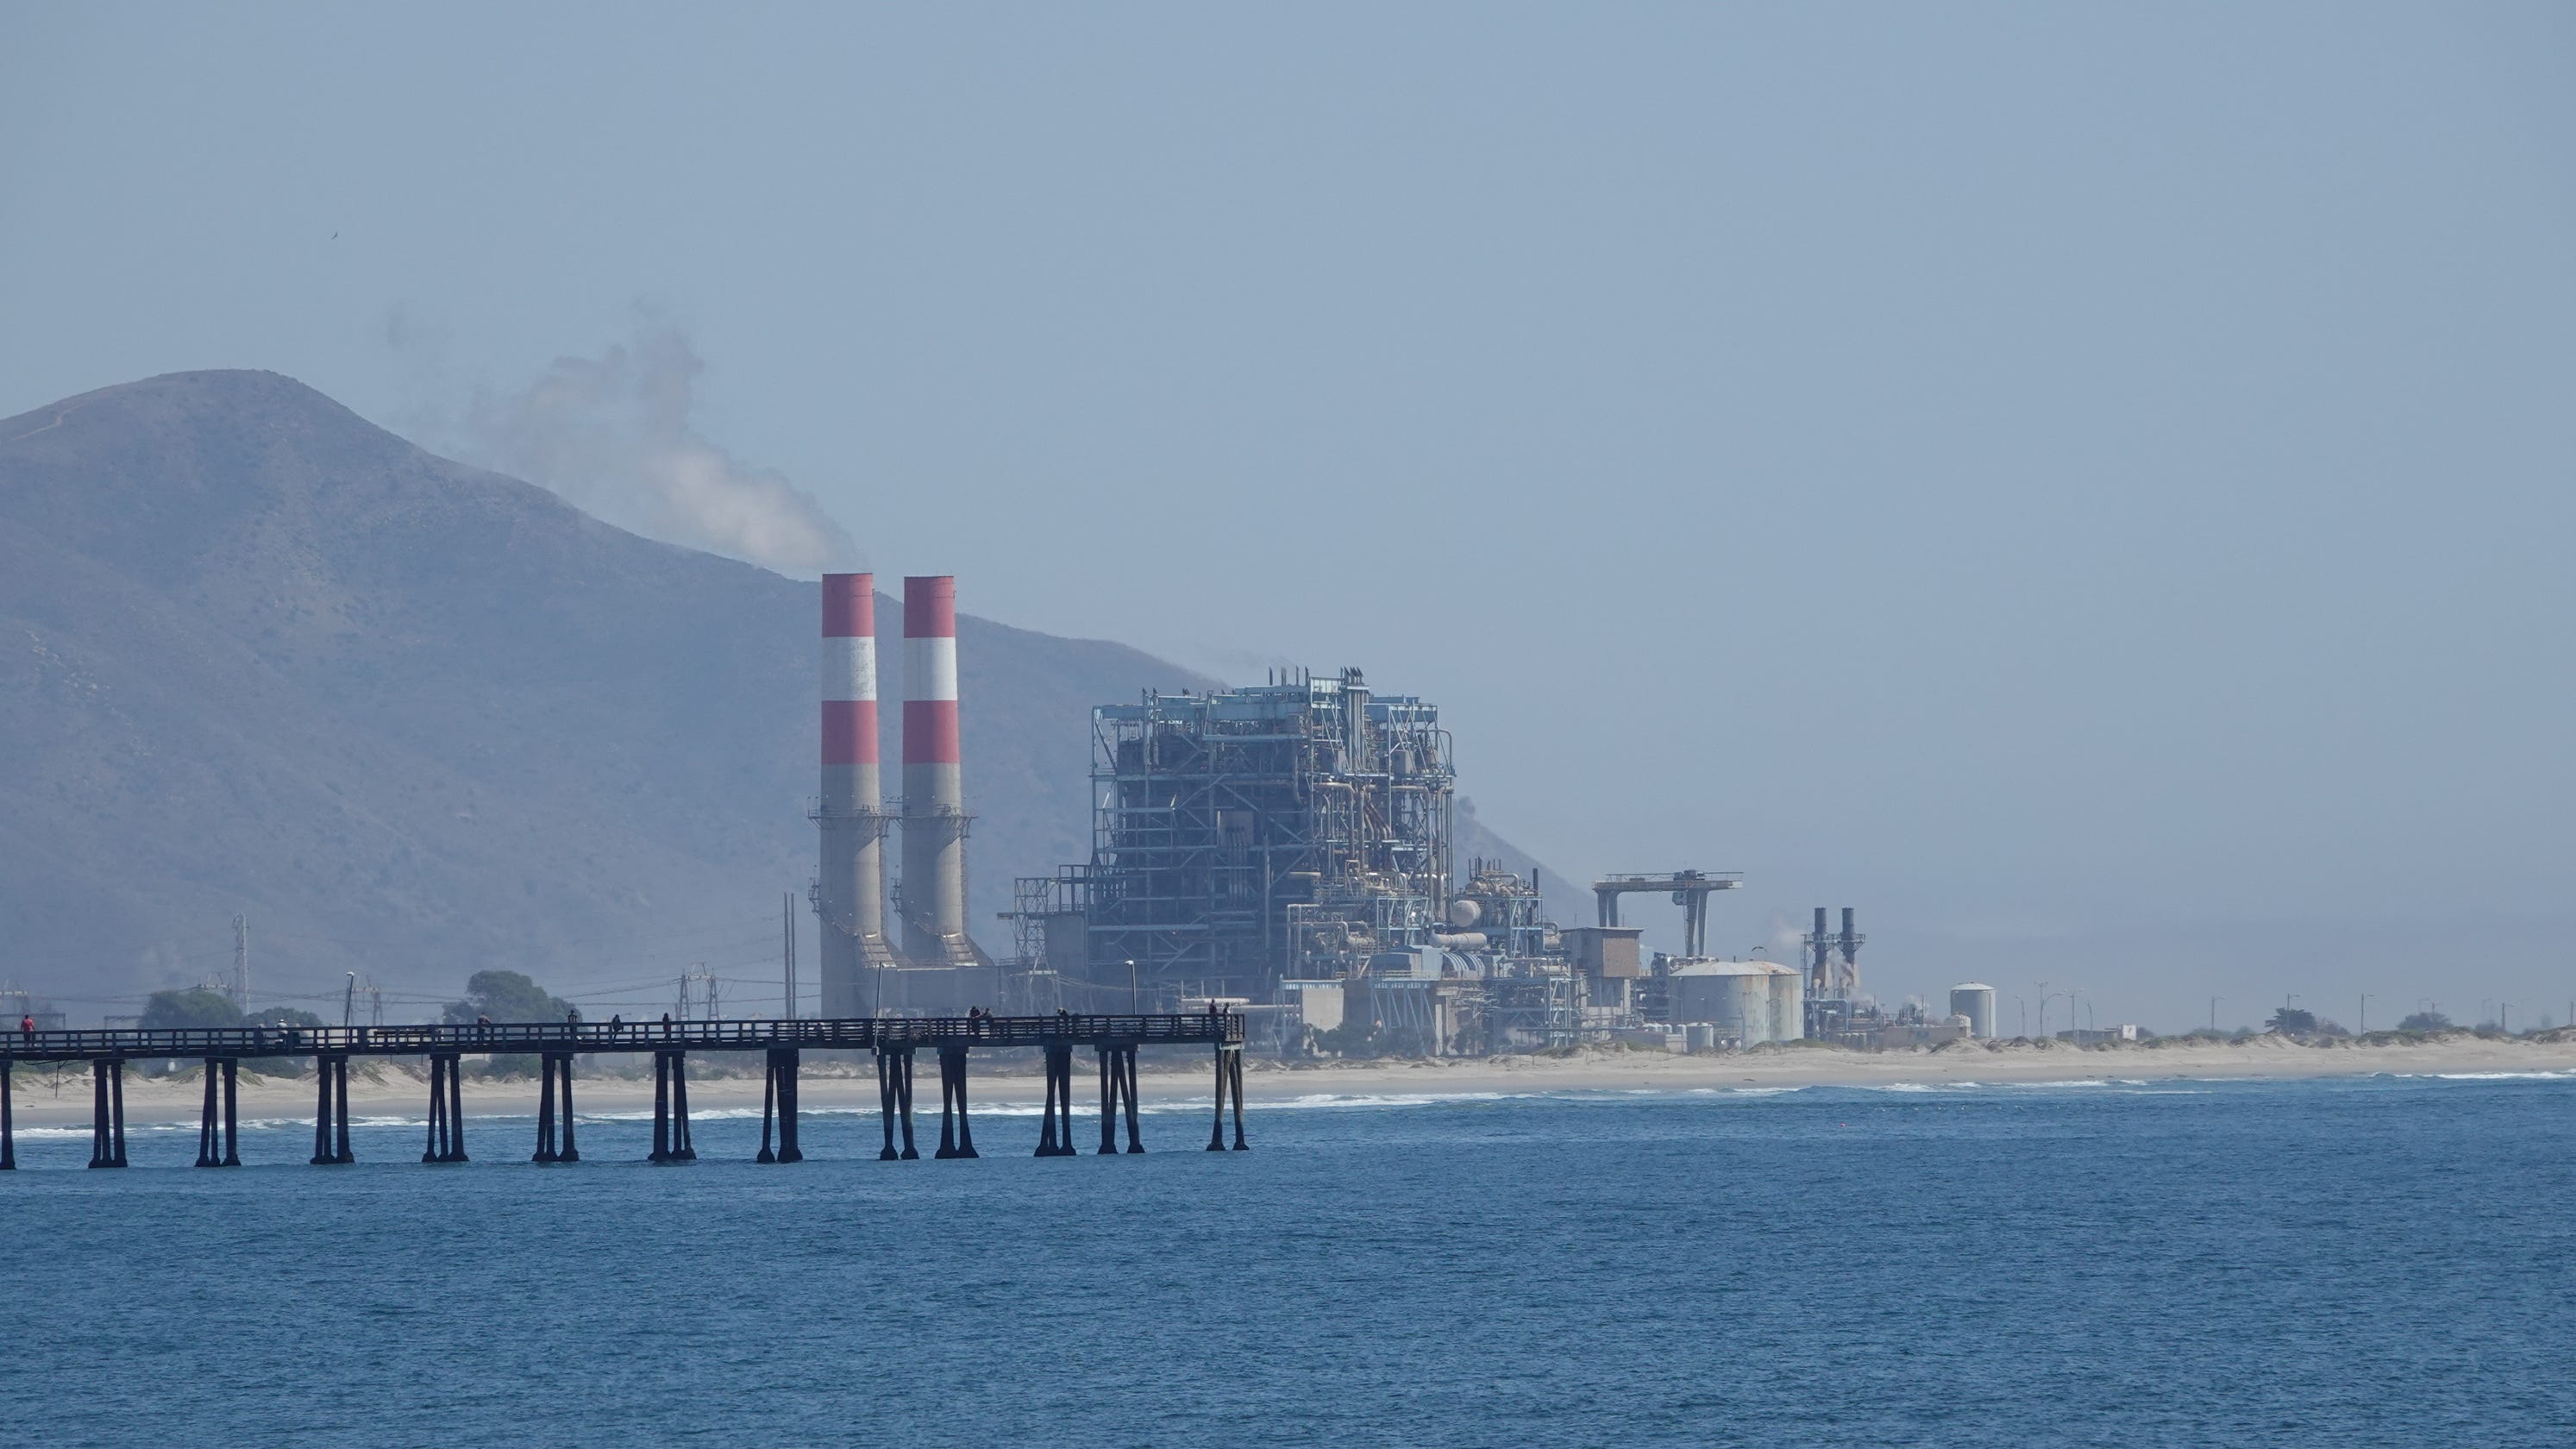 Power plant at Ormond Beach could continue operating past 2020 end date - VC Star